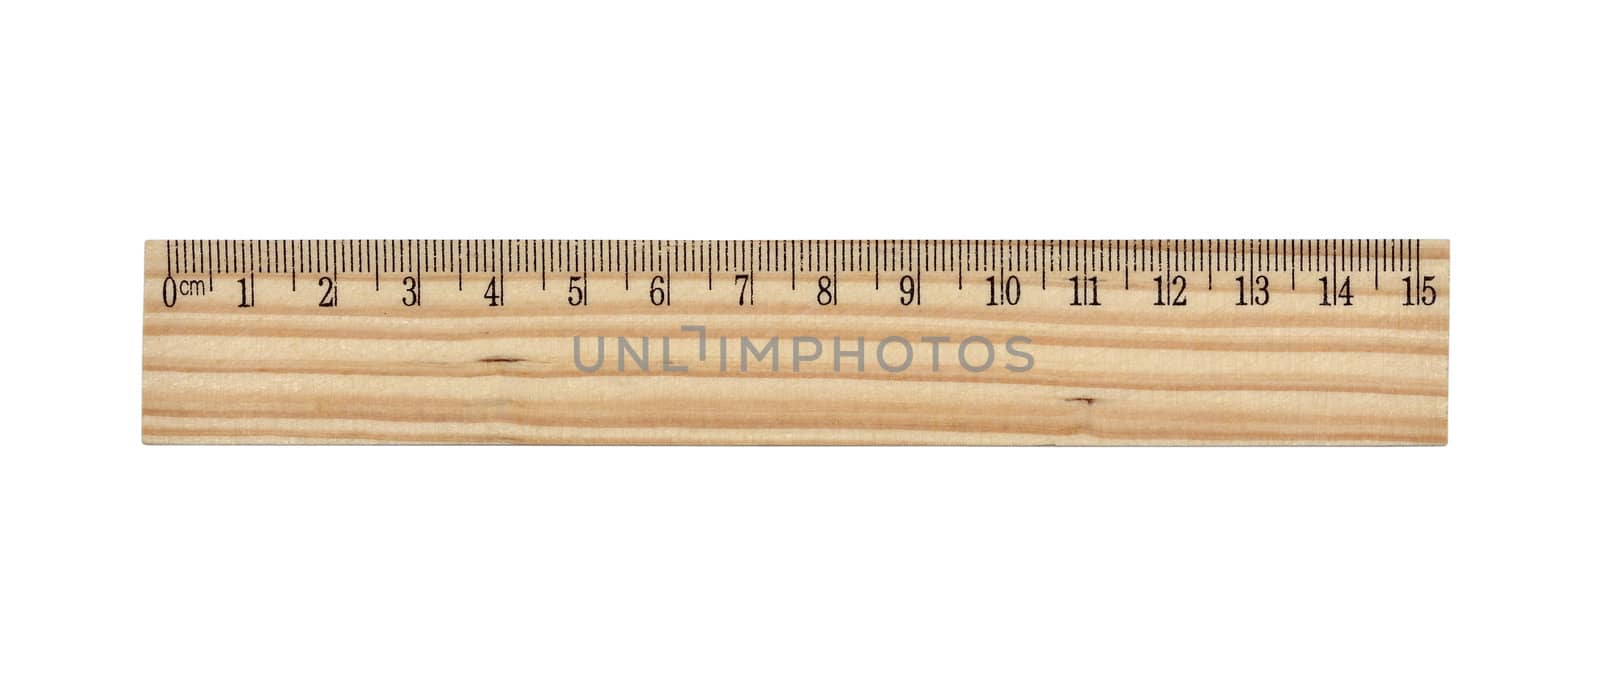 wooden ruler isolated on white